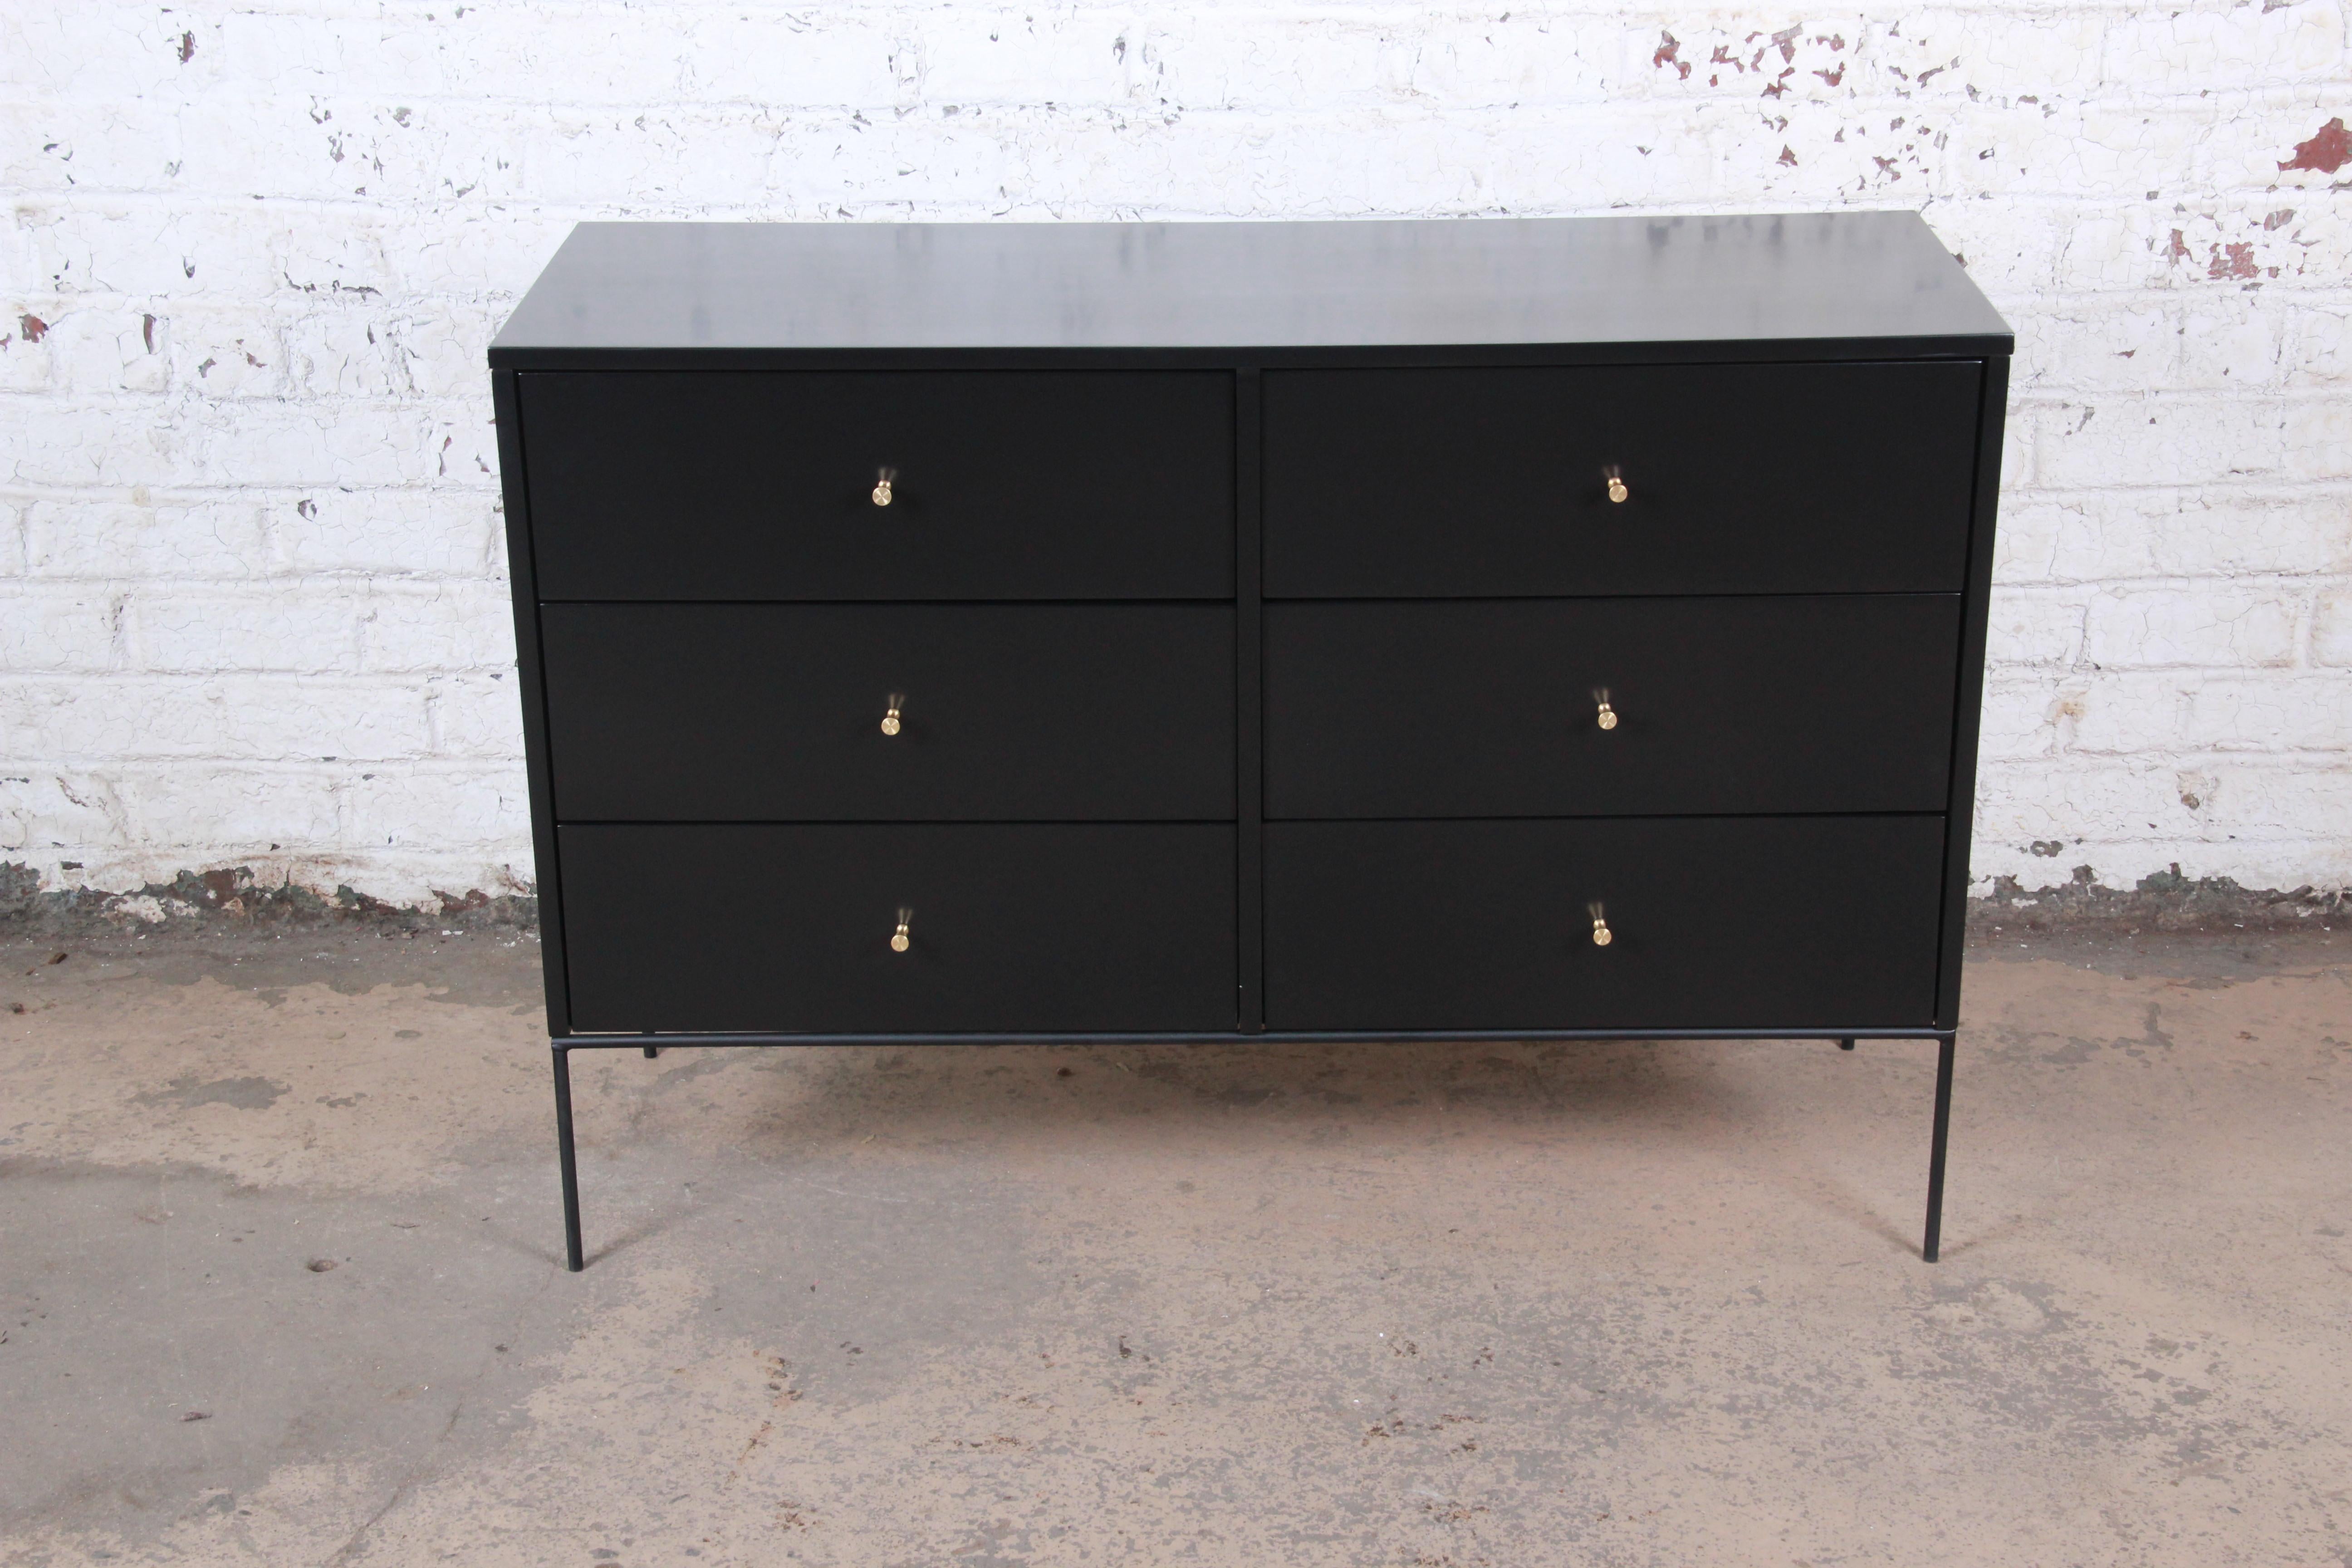 An exceptional Mid-Century Modern six-drawer iron base dresser or credenza

Designed by Paul McCobb for Winchendon Furniture 